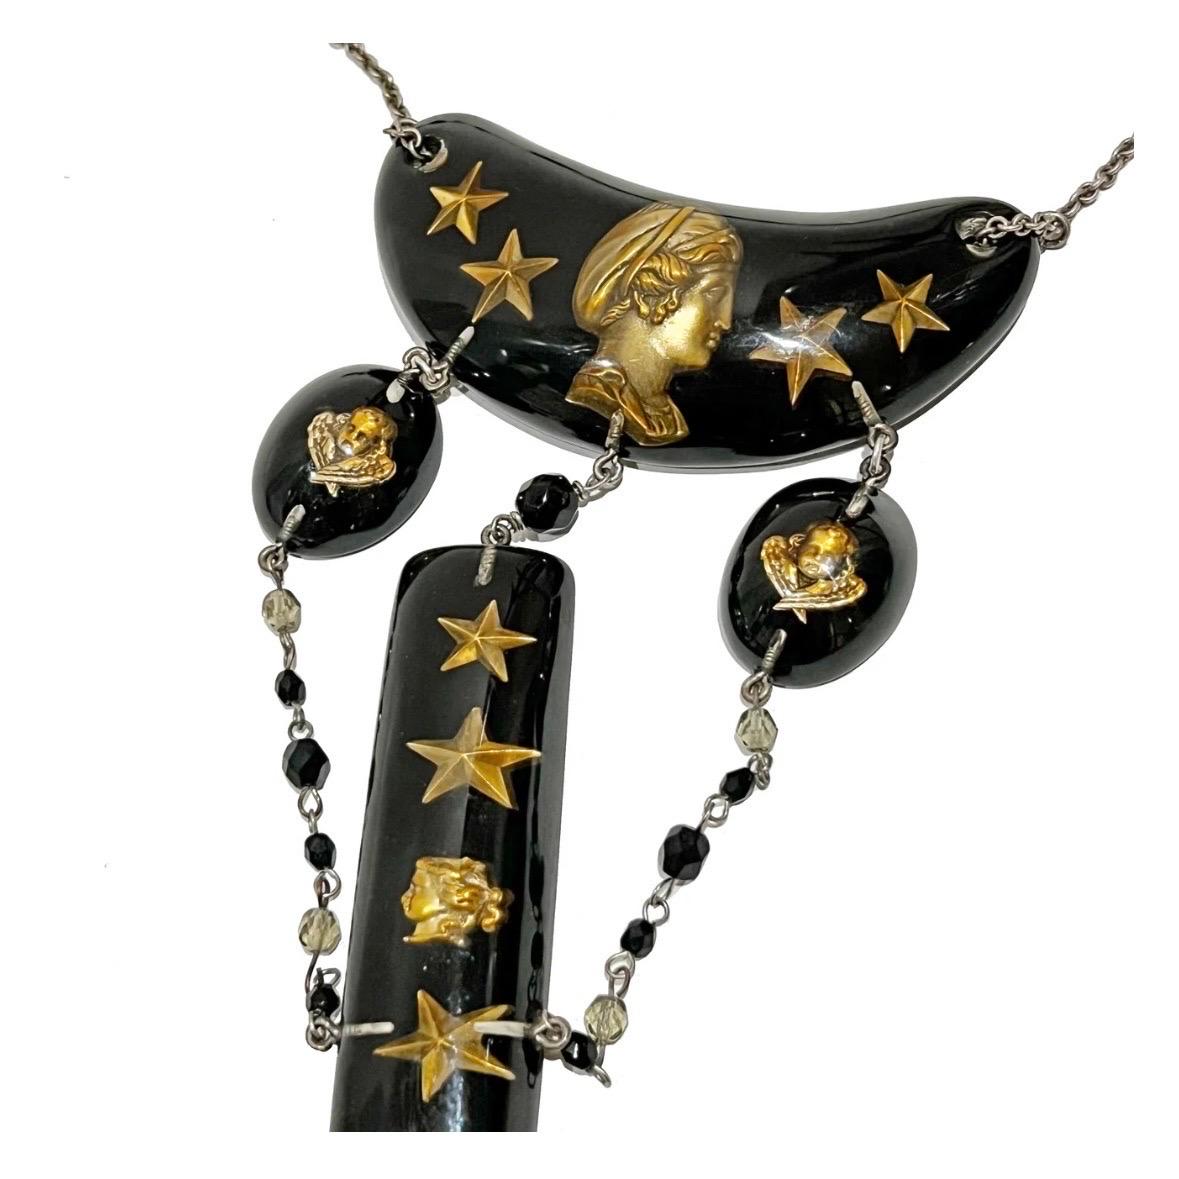 Vintage Lucite Tiered necklace by Jean Paul Gaultier
Circa 1995
Made in France
Matte silver metal hardware 
Black lucite shapes with gold cameo and stars beneath clear resin layer connected by black and grey beaded chain
Adjustable length 
Lobster